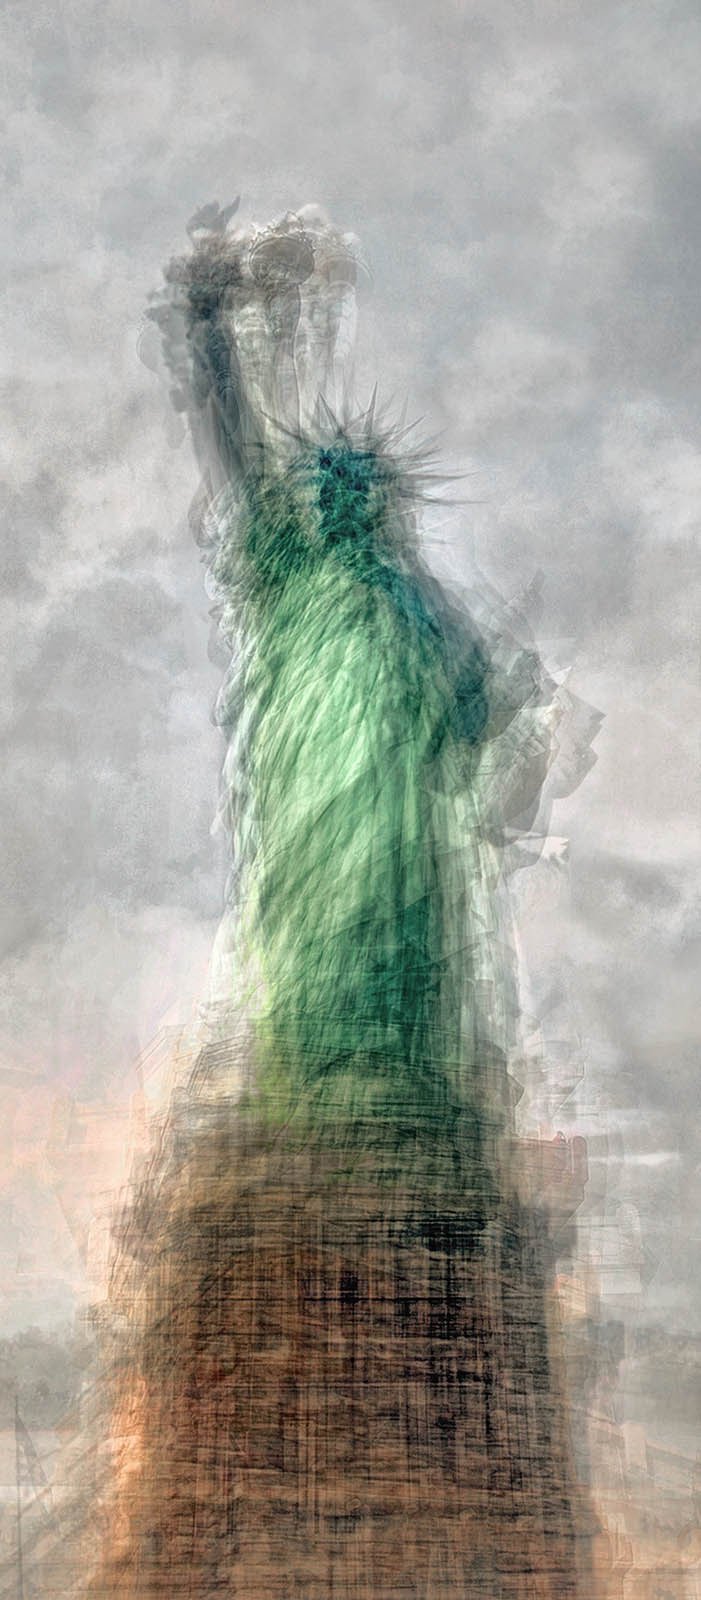 Statue of Liberty by Pep Ventosa